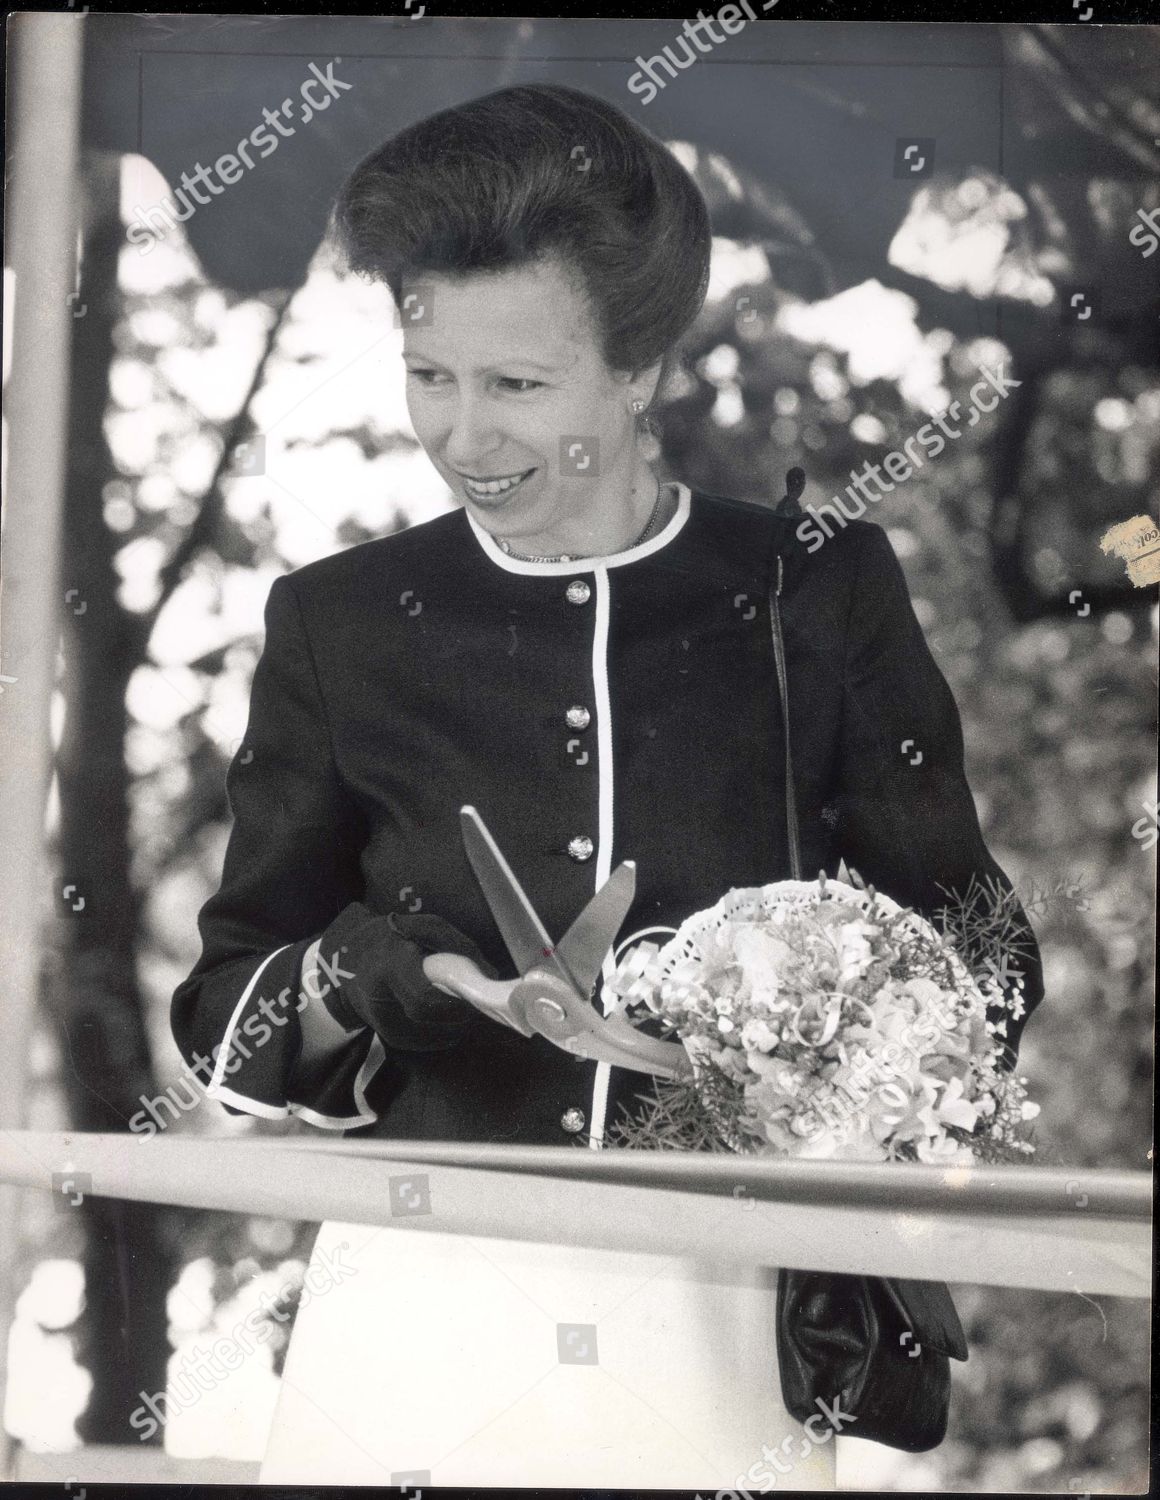 princess-anne-now-princess-royal-july-1990-princess-anne-cuts-a-tape-to-open-the-international-flower-show-at-hampton-court-palace-today-british-rail-chairman-sir-bob-reid-had-a-new-section-of-railway-line-to-show-the-princess-royal-today-but-it-shutterstock-editorial-930160a.jpg